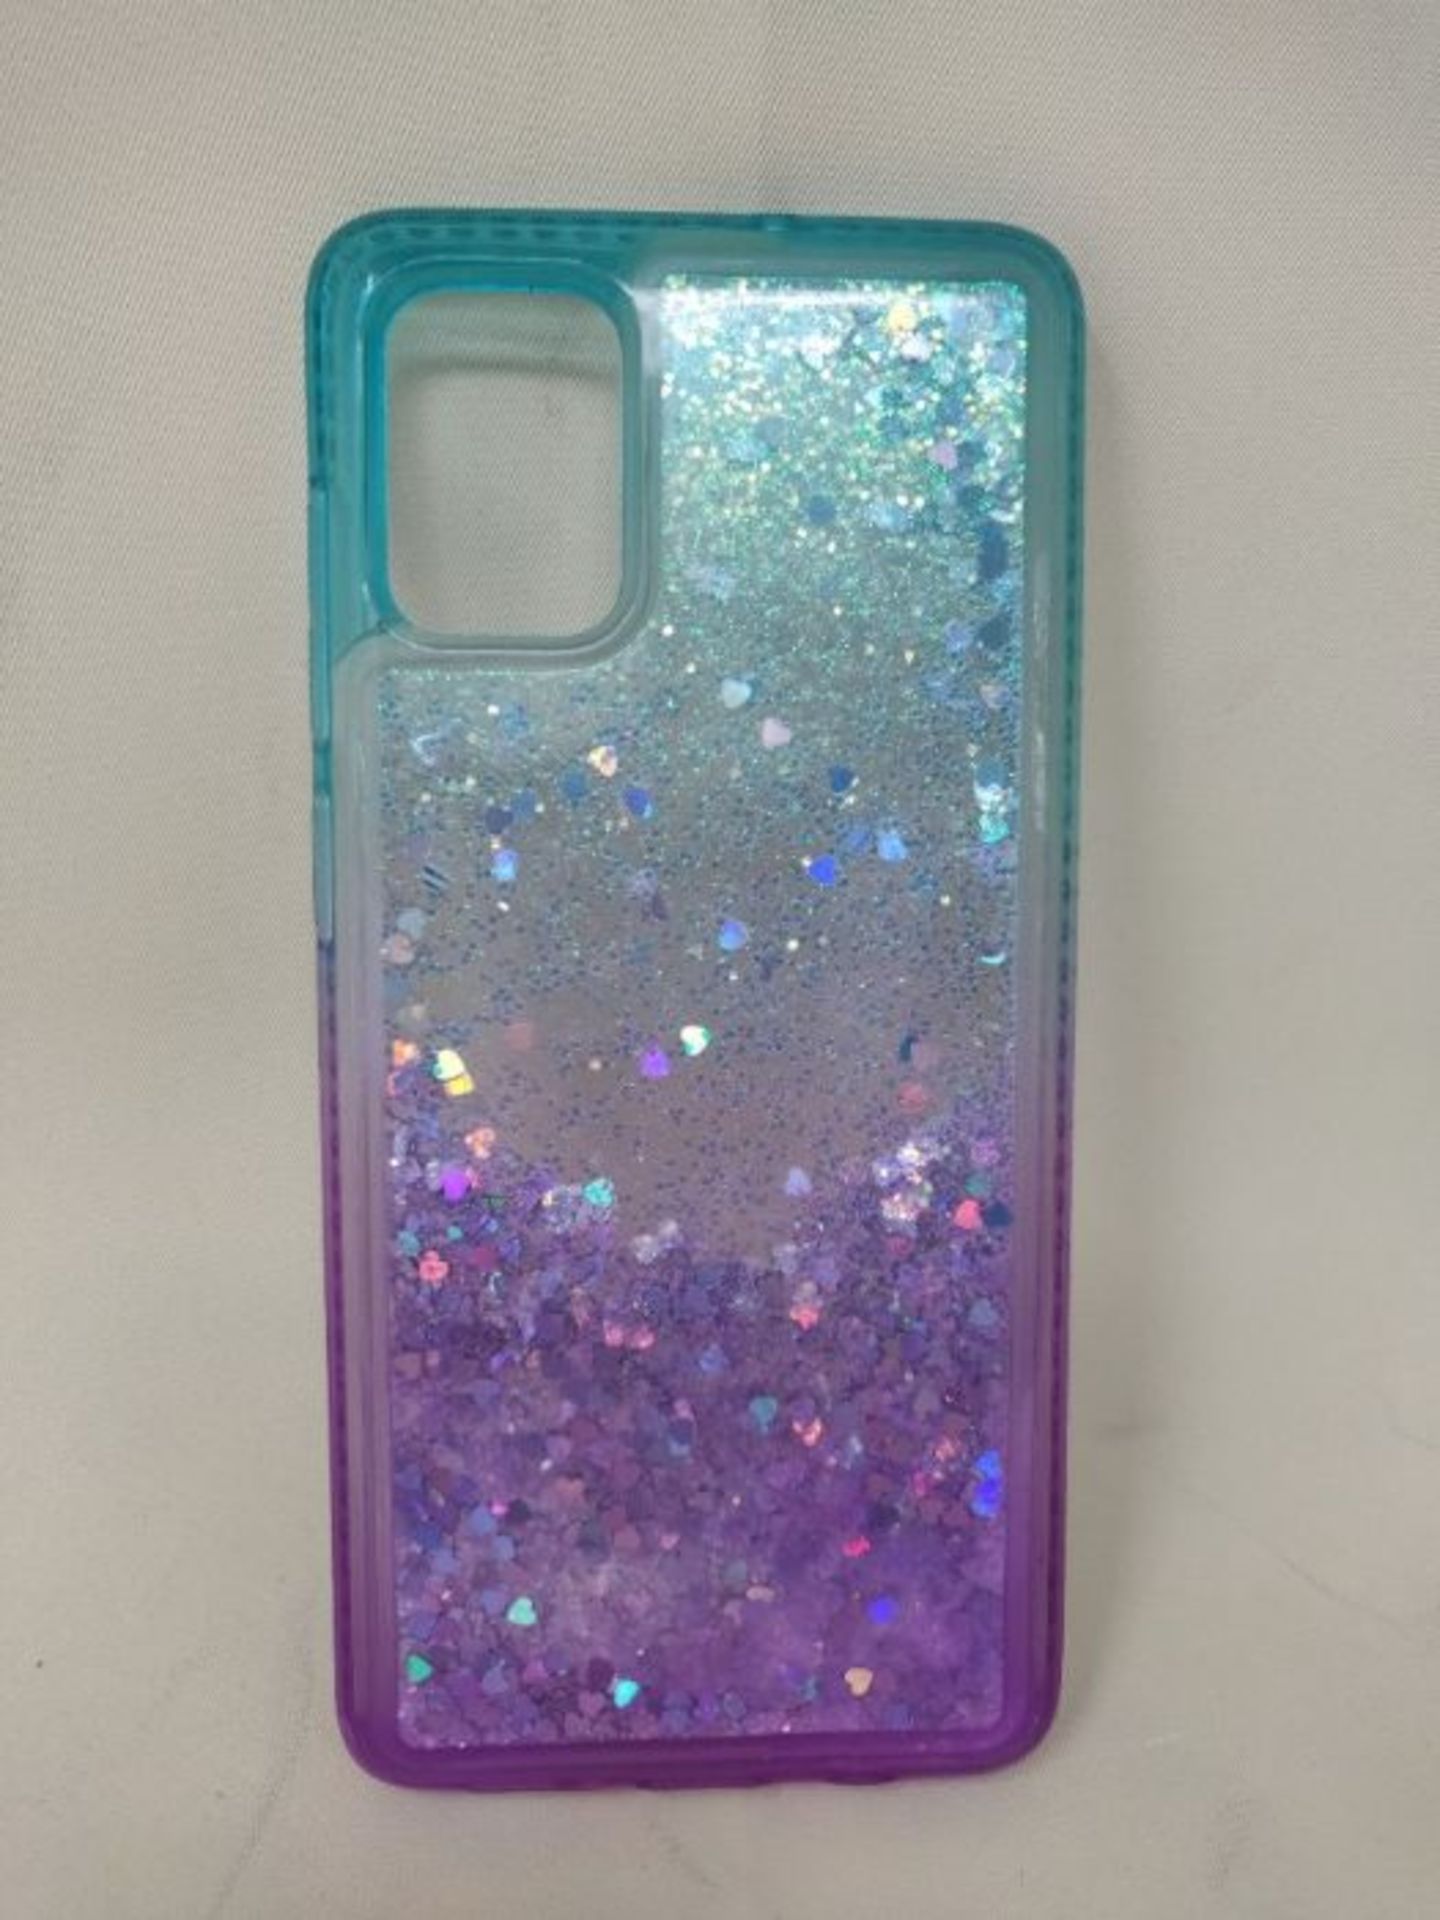 LeYi for Samsung Galaxy A71 4G Case, Girl 3D Clear Glitter Quicksand Cute Personalised - Image 2 of 2